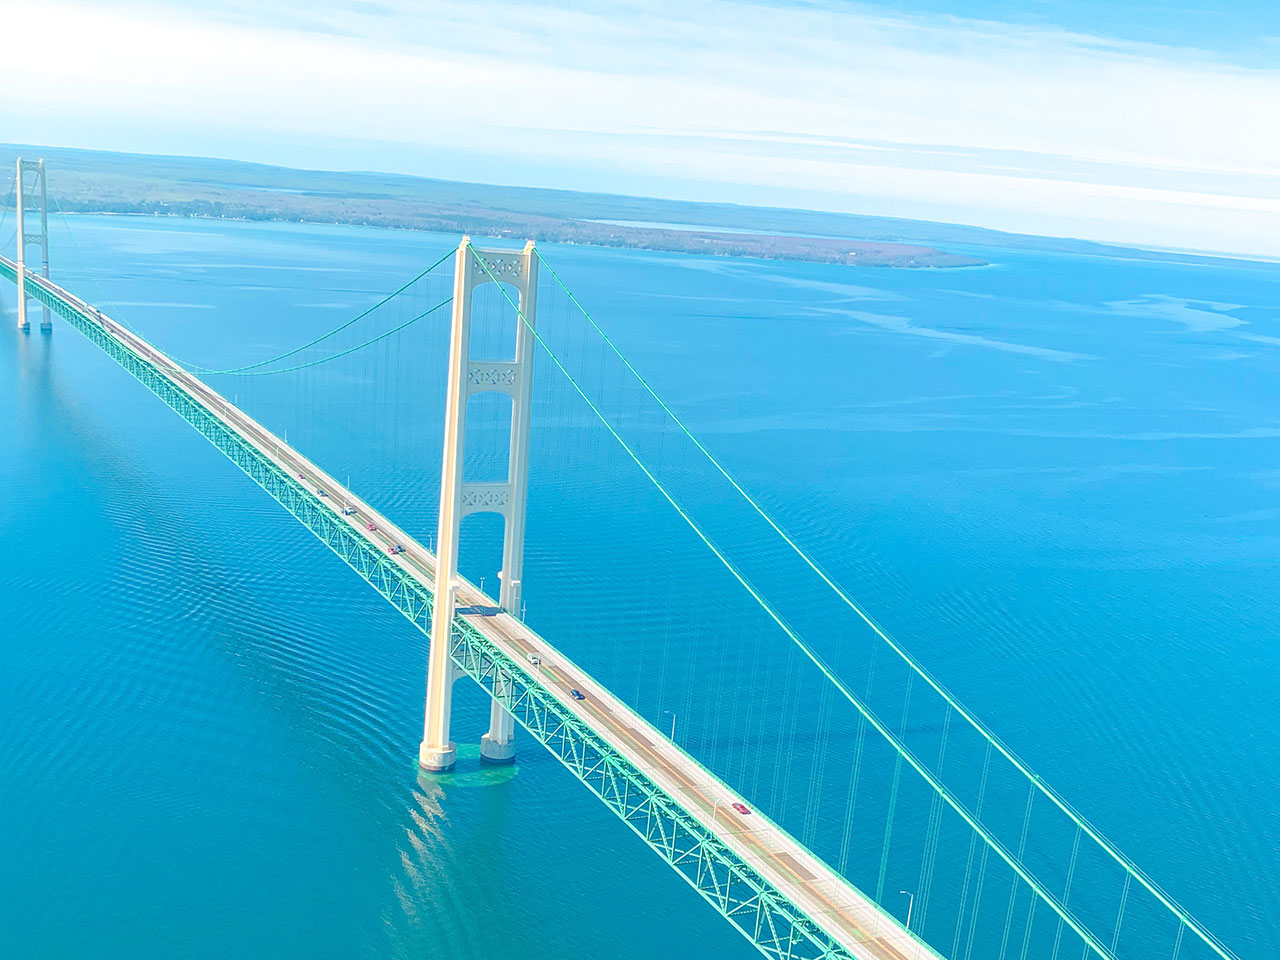 St. Ignace bridge view from a helicopter ride